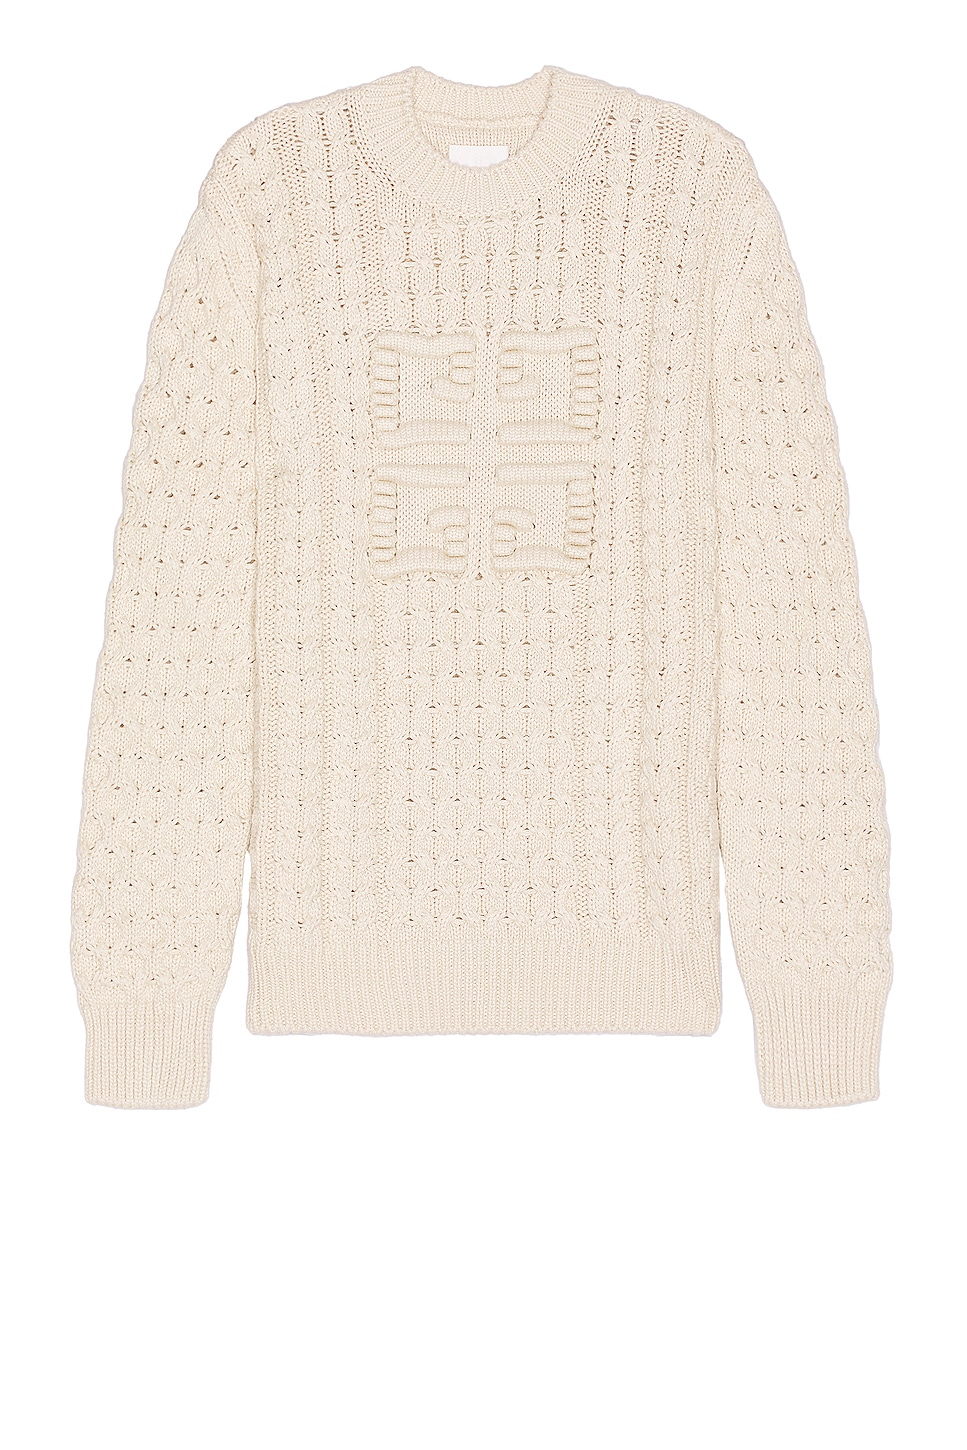 Image 1 of Givenchy Crew Neck Sweater in Cream